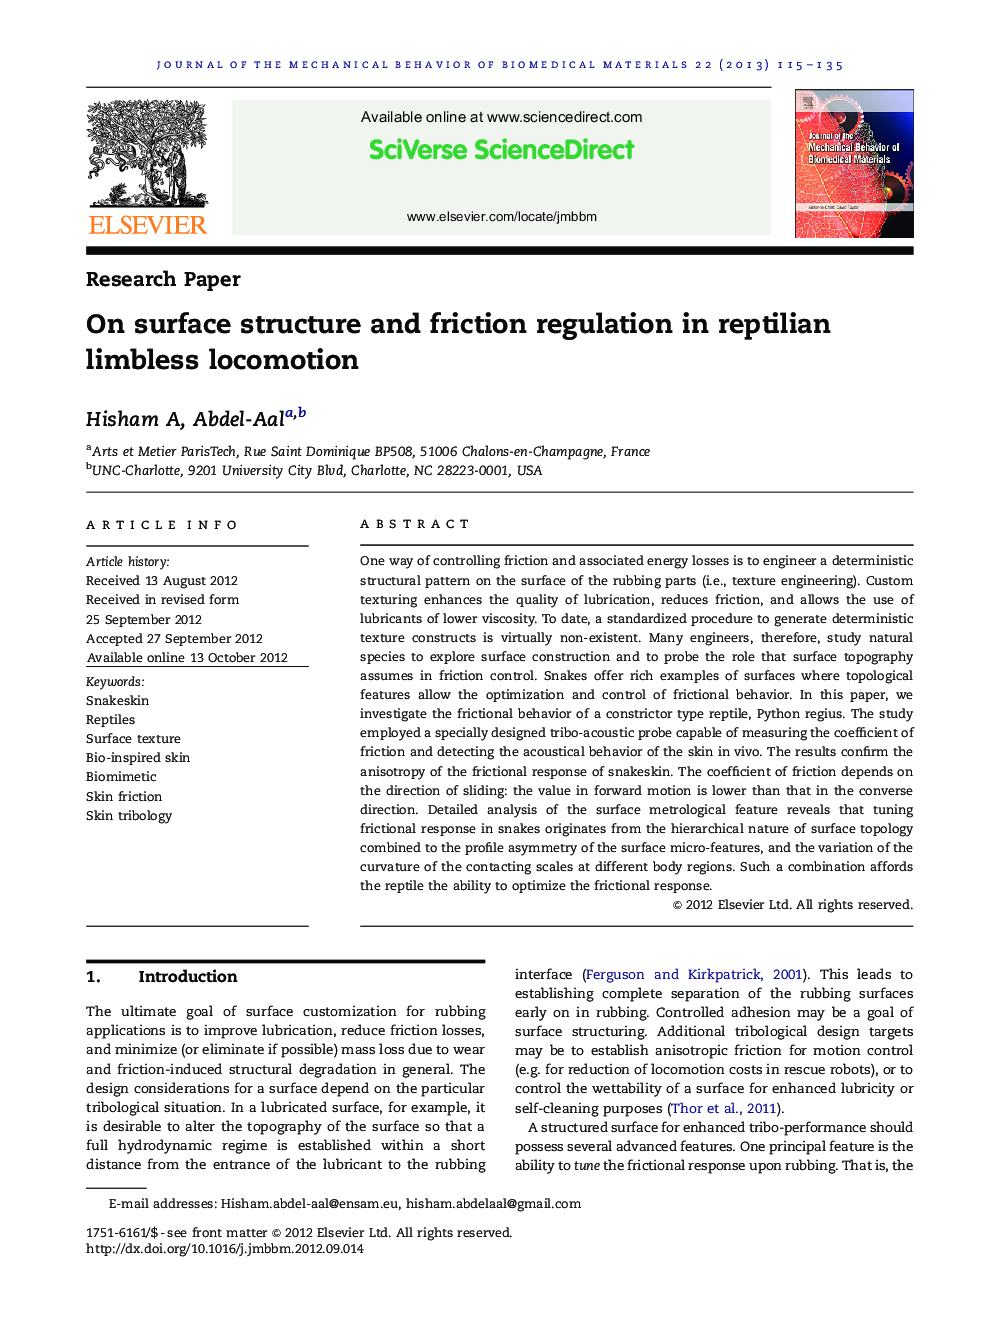 On surface structure and friction regulation in reptilian limbless locomotion